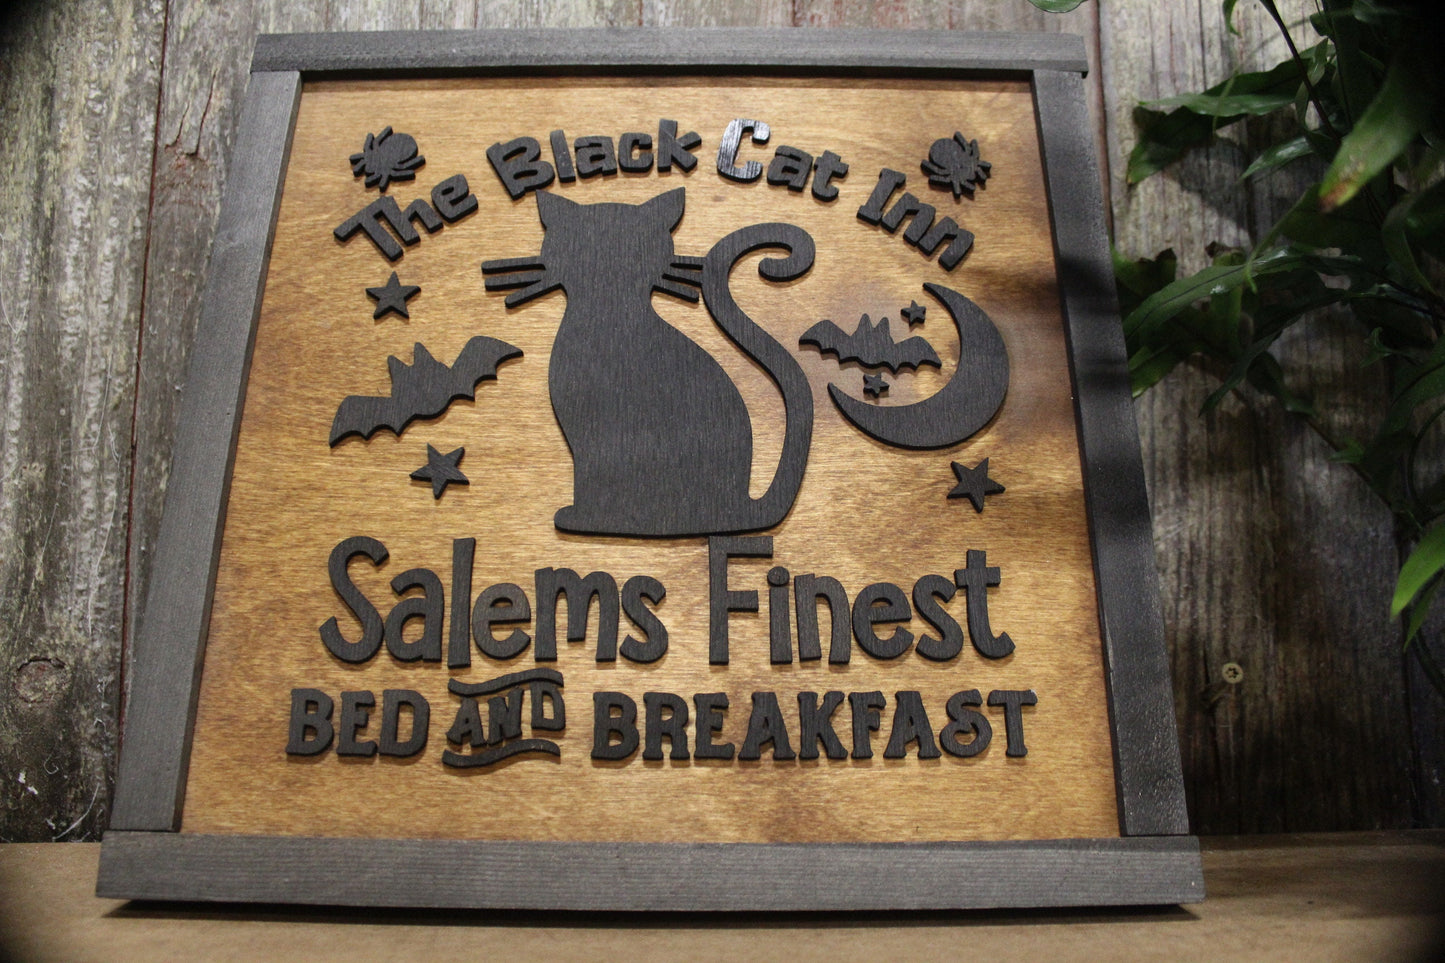 Black Cat Salem Fine Bed and Breakfast Square Wood 3D lettering Classic Rustic Halloween Fall Autumn Holiday Seasonal Bats Cute Kitchen Home